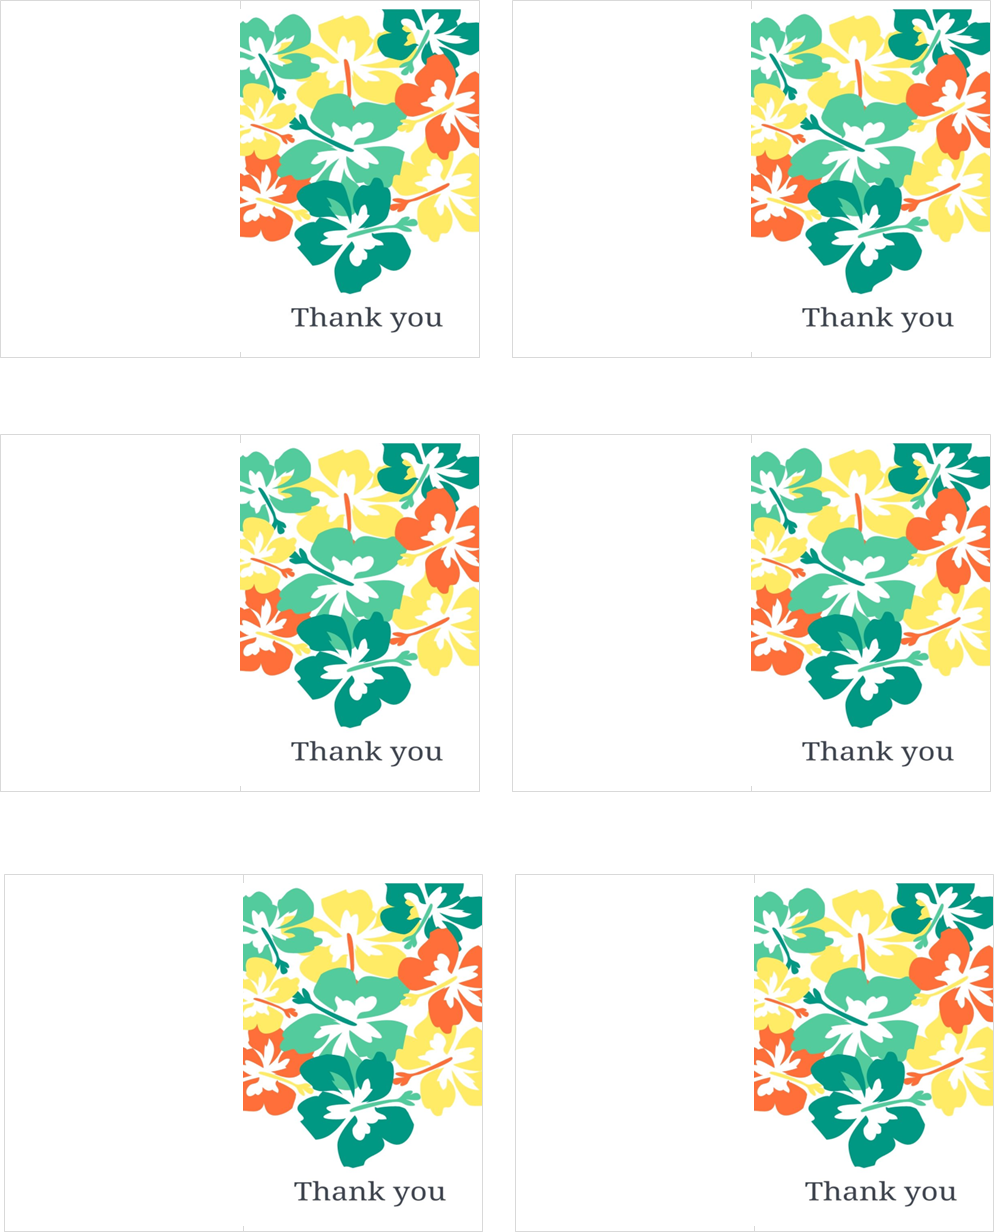 mini-thank-you-cards-free-printables-keeping-it-real